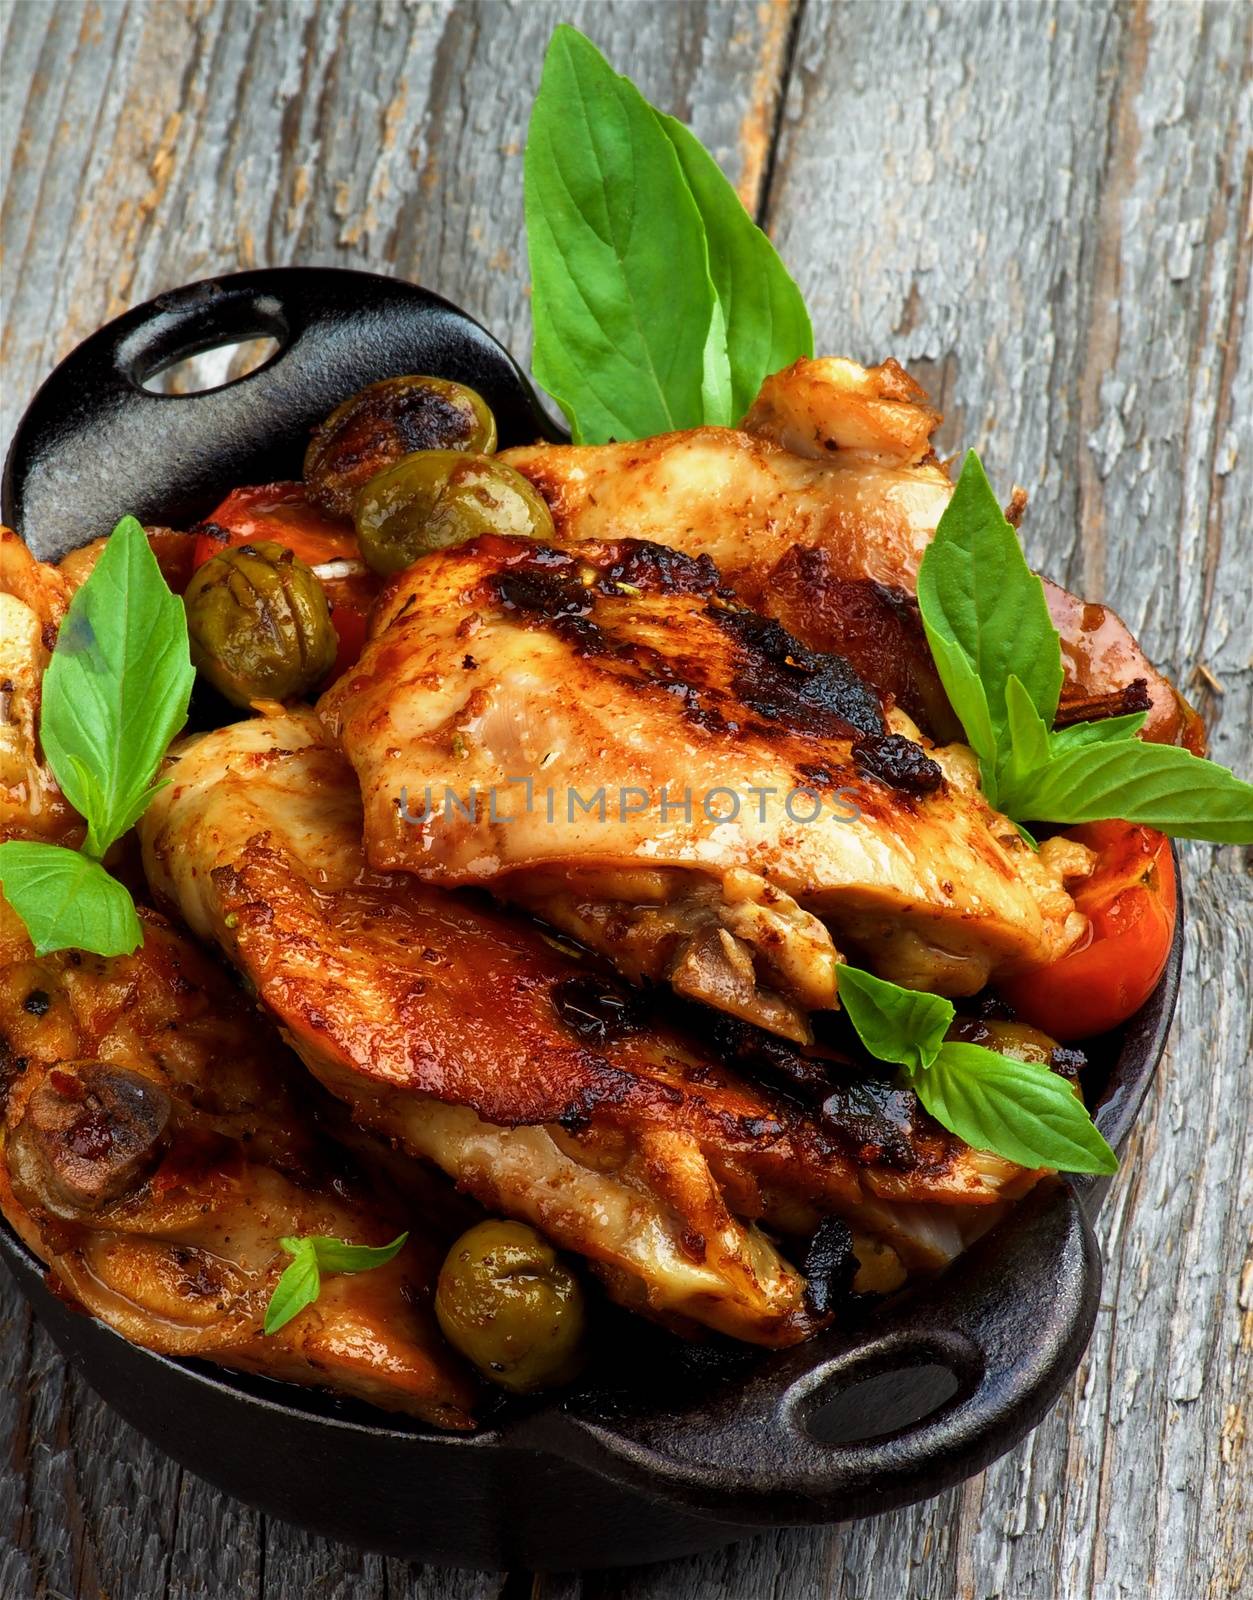 Delicious Roasted Chicken Thighs with Green Olives, Cherry Tomatoes and Basil in Black Fry Pan closeup on Rustic Wooden background